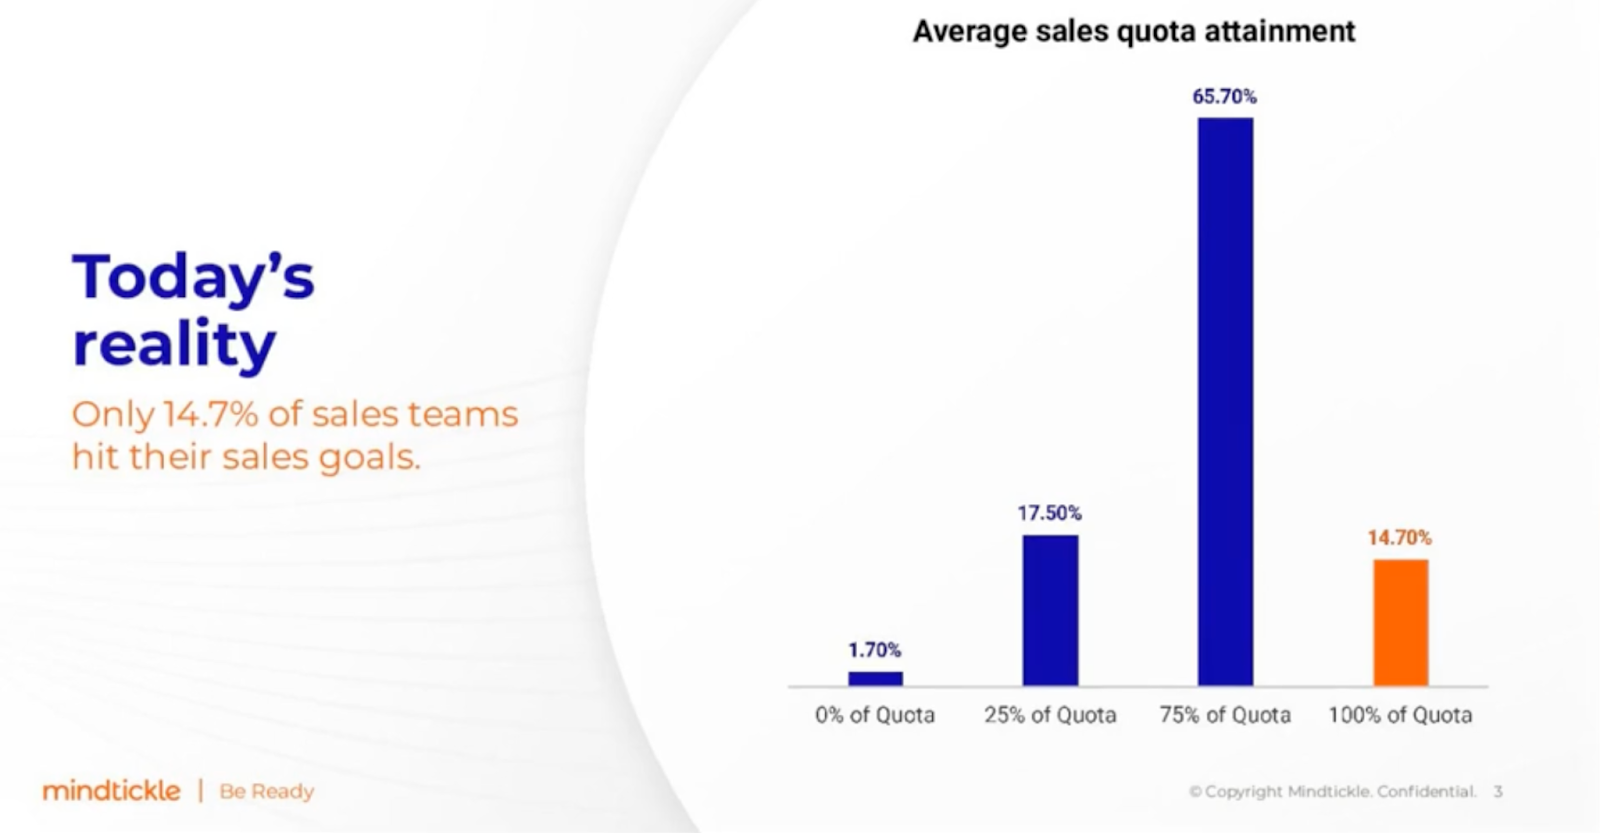 A graph which shows 'today's reality' - only 14.7% of sales teams hit their sales goals. 1.7% hit 0% of quota, 17.5% hit 25% of quota, 65.7% hit 75% of quota, and 14.7% hit 100% of quota.